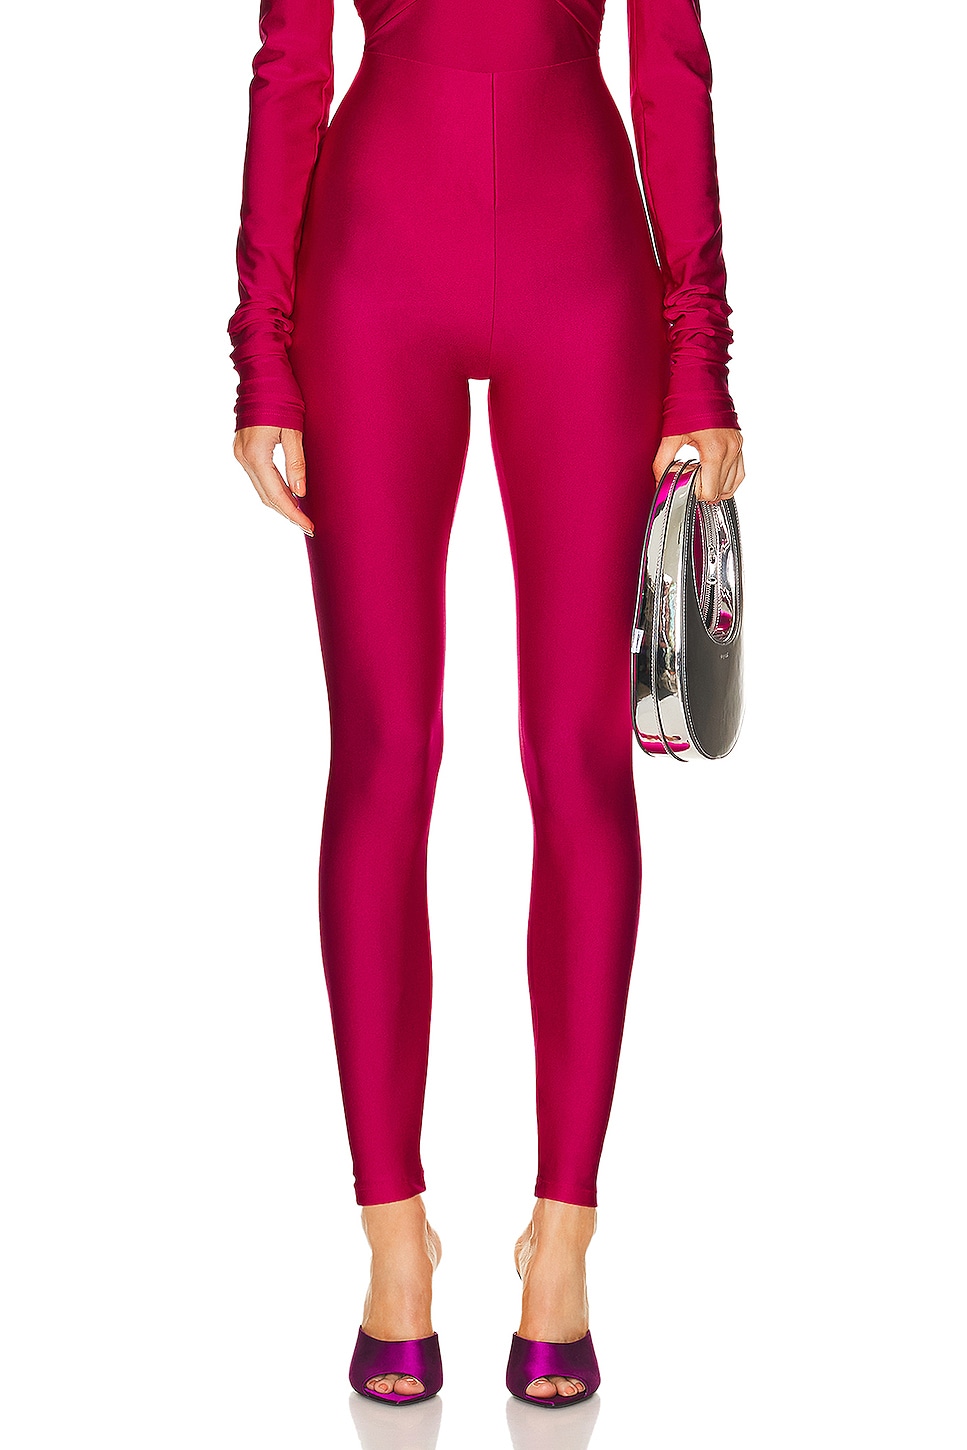 Image 1 of The Andamane Holly 80s Legging in Fuxia